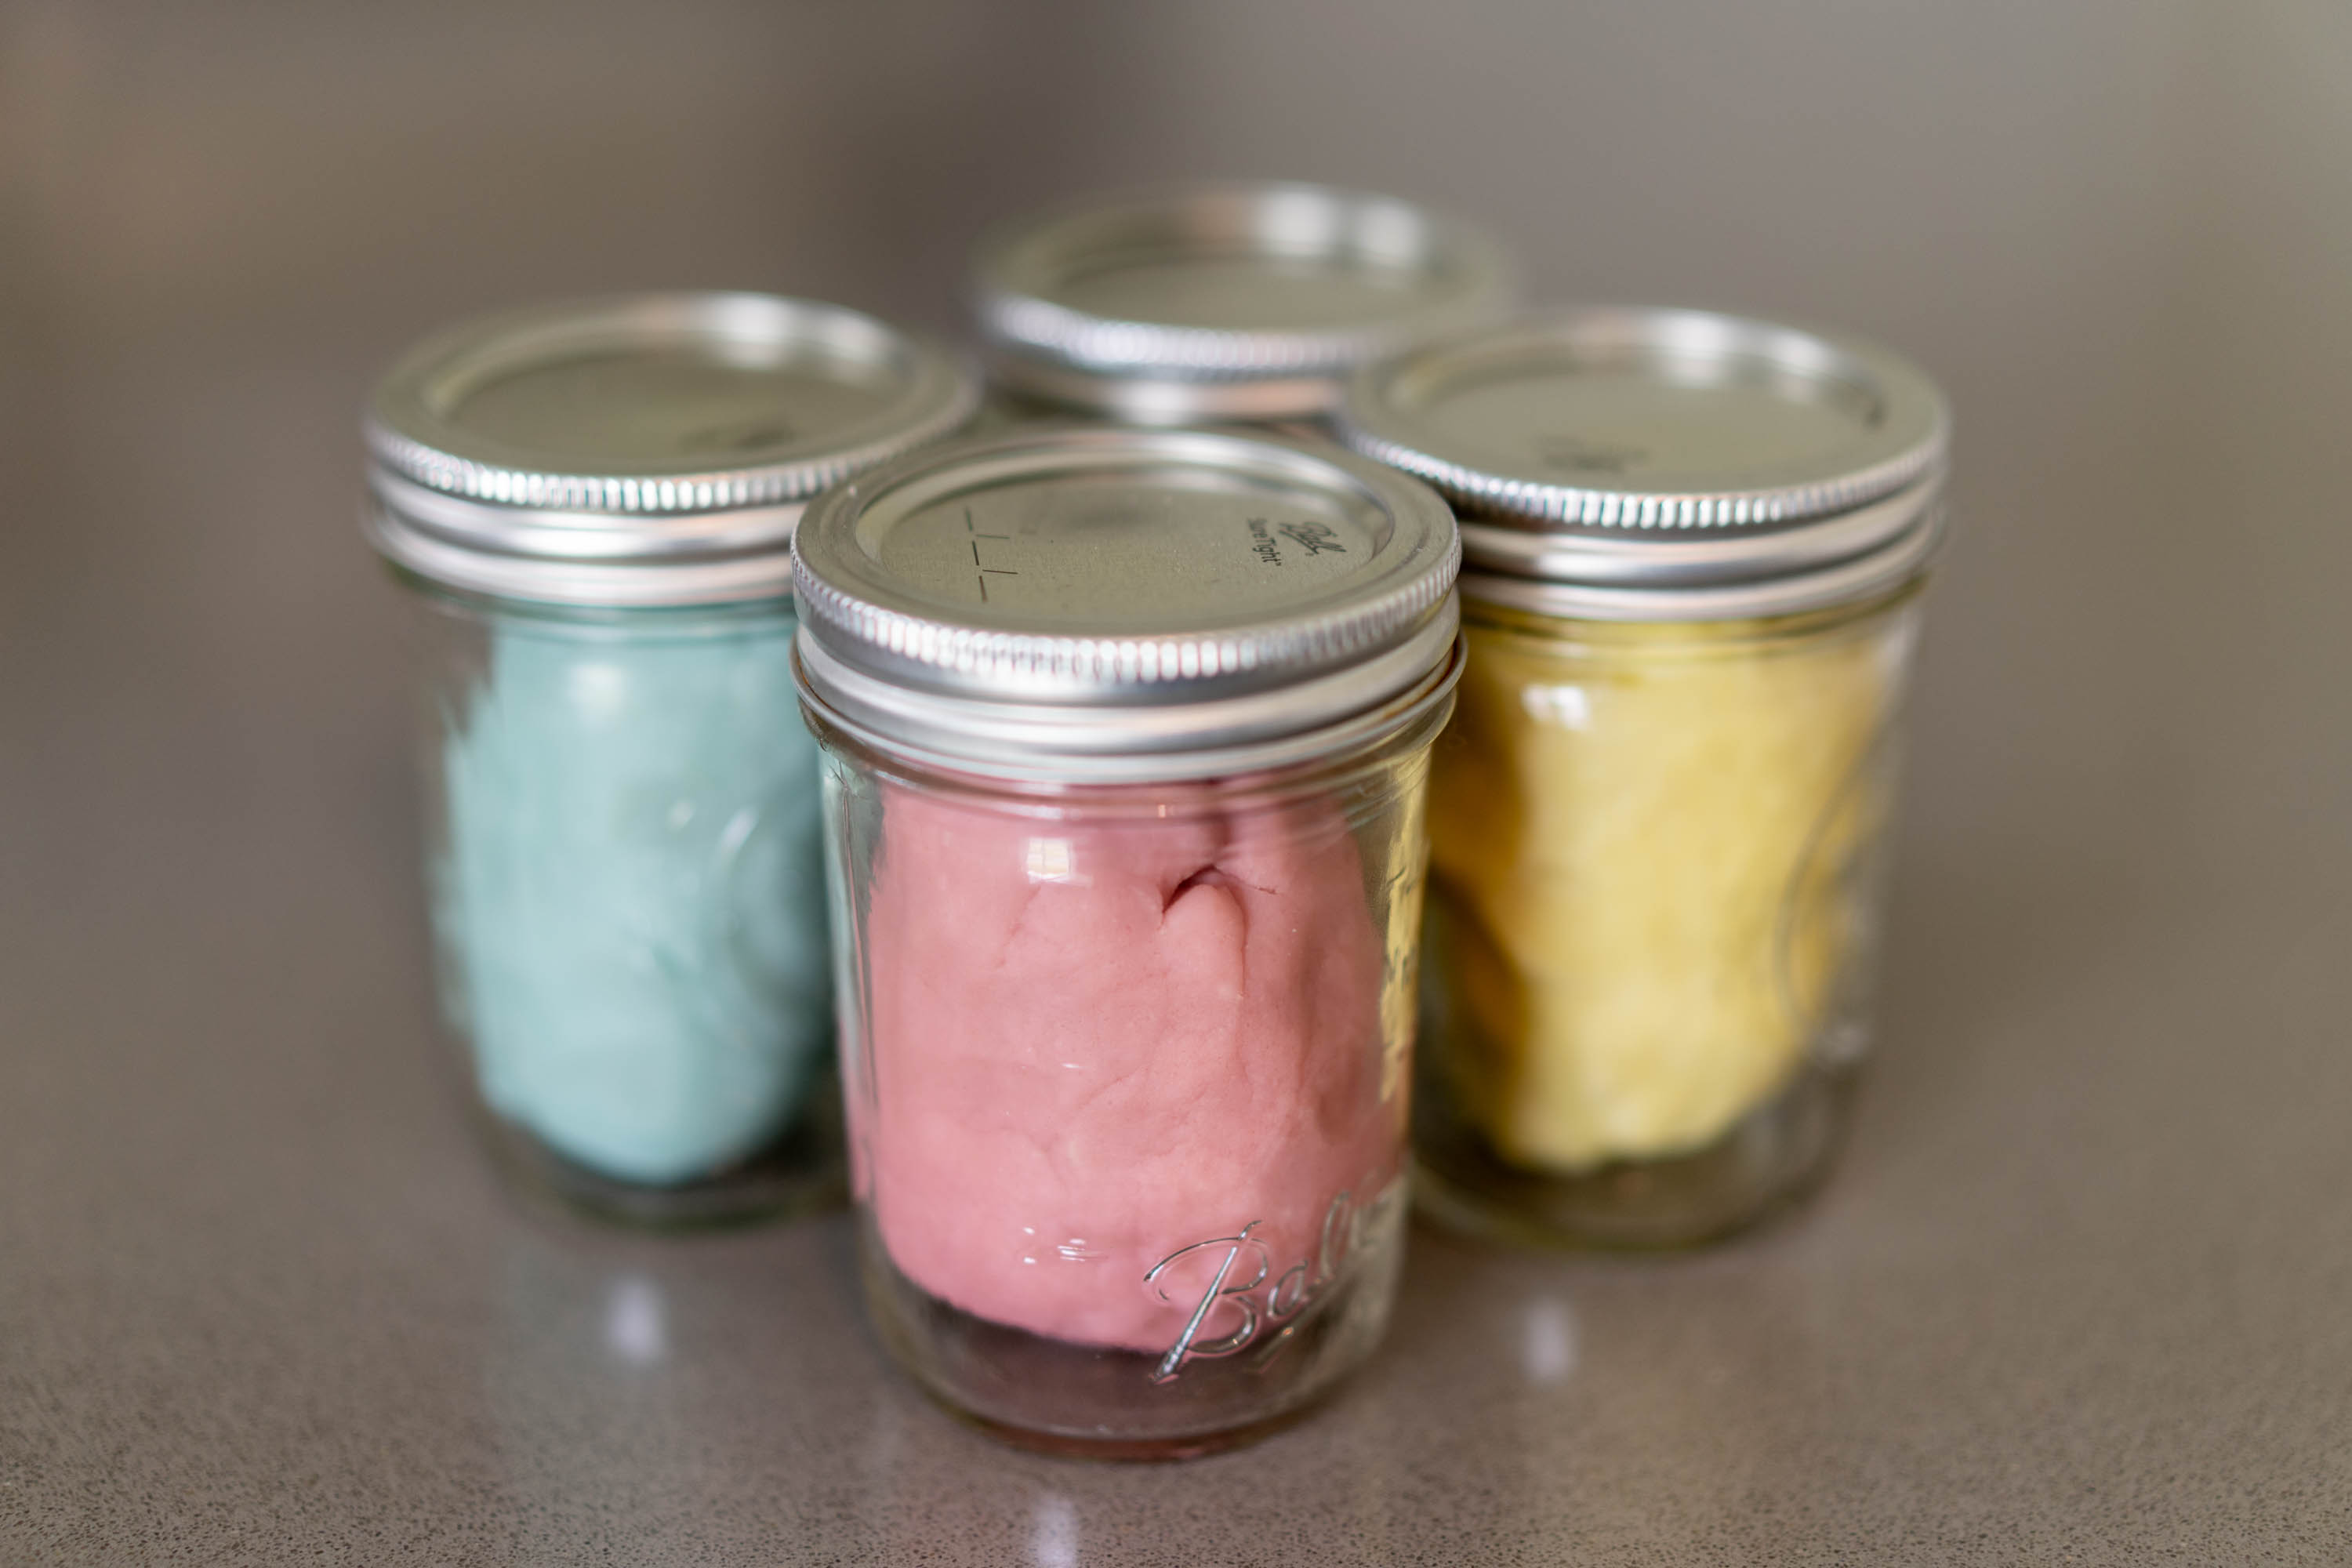 Homemade playdoh, Make it at home with this easy recipe